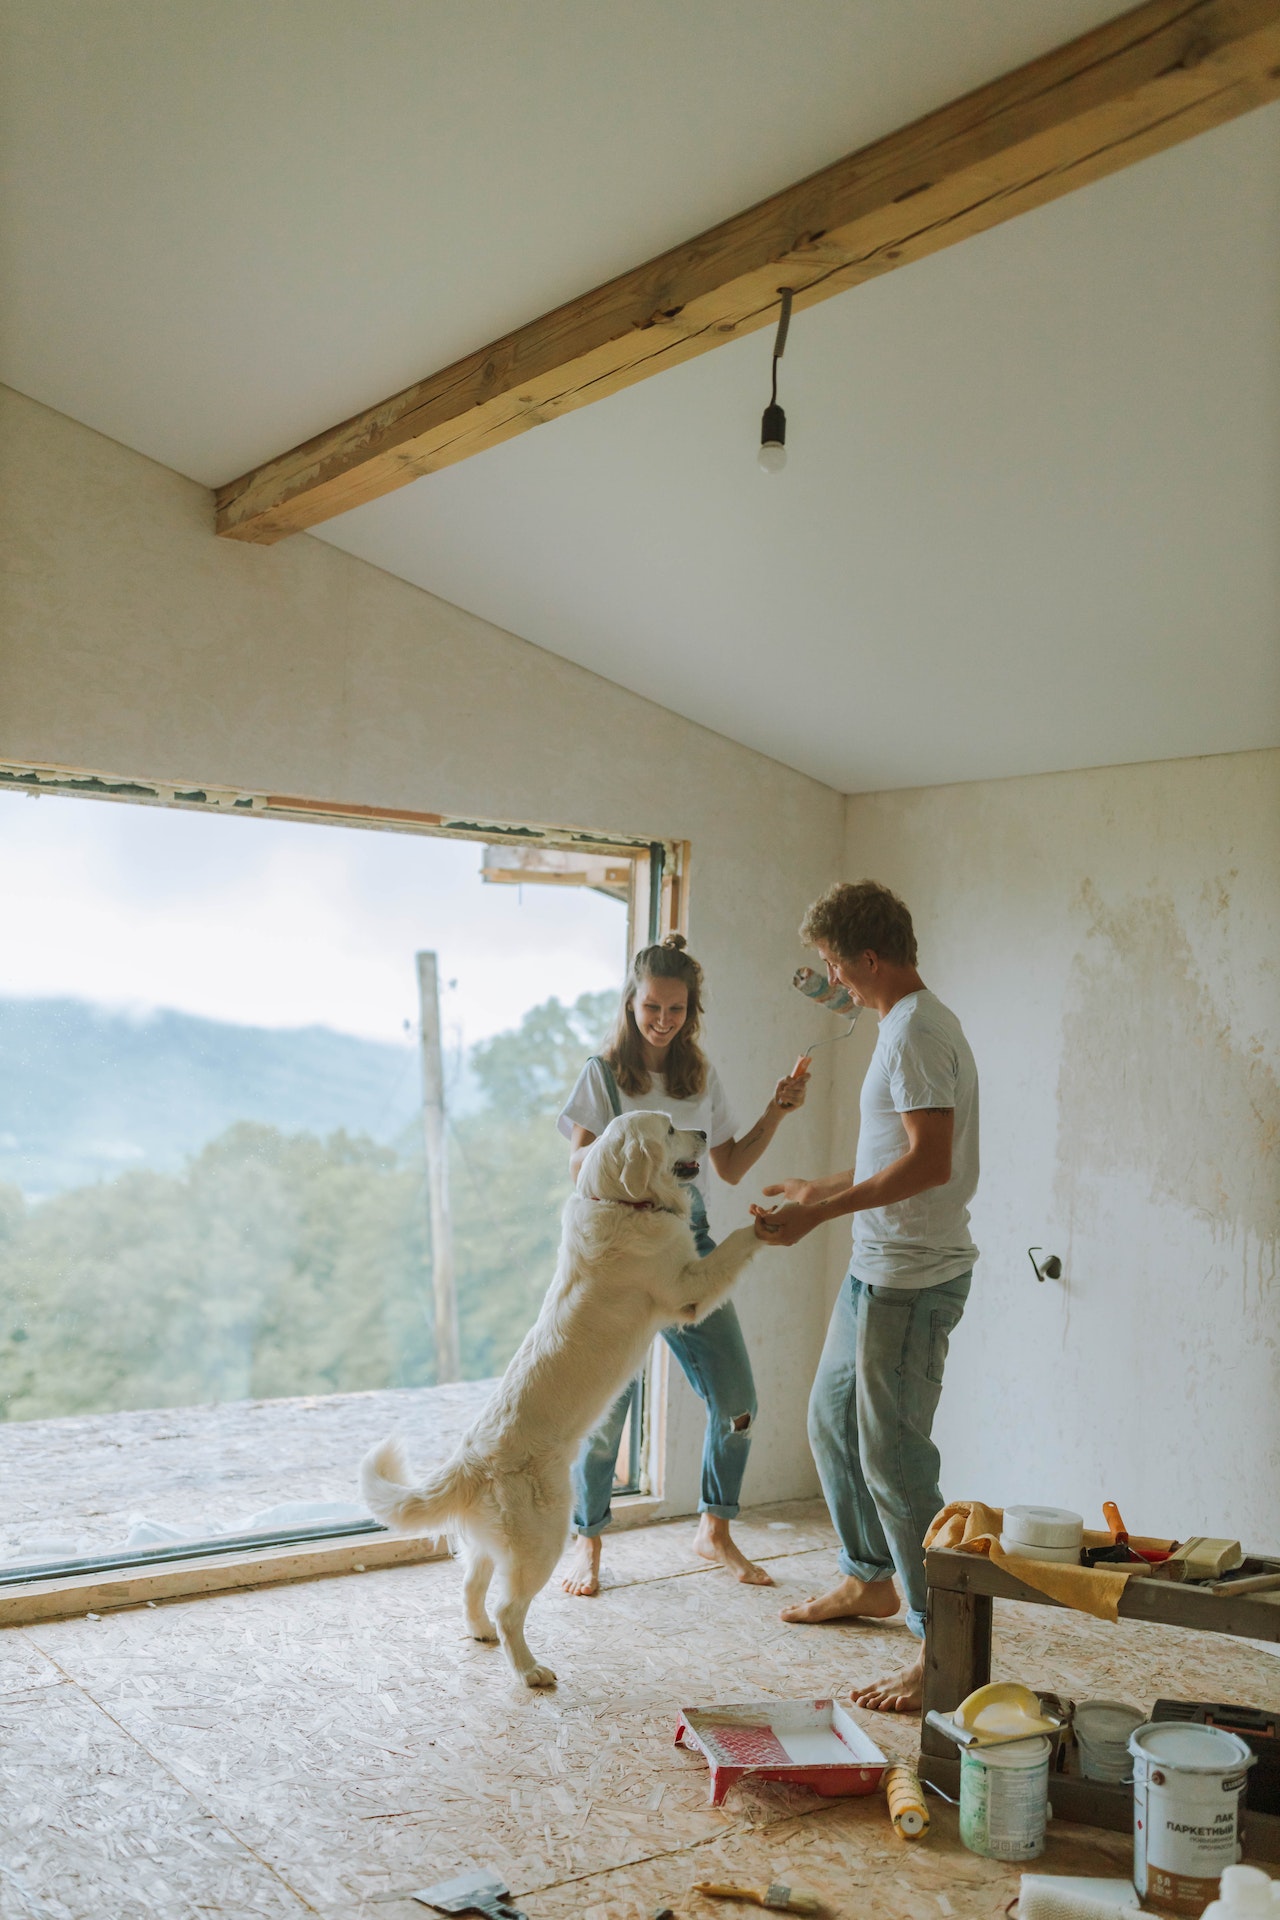 Man and Woman Playing with their Dog While Doing Renovation